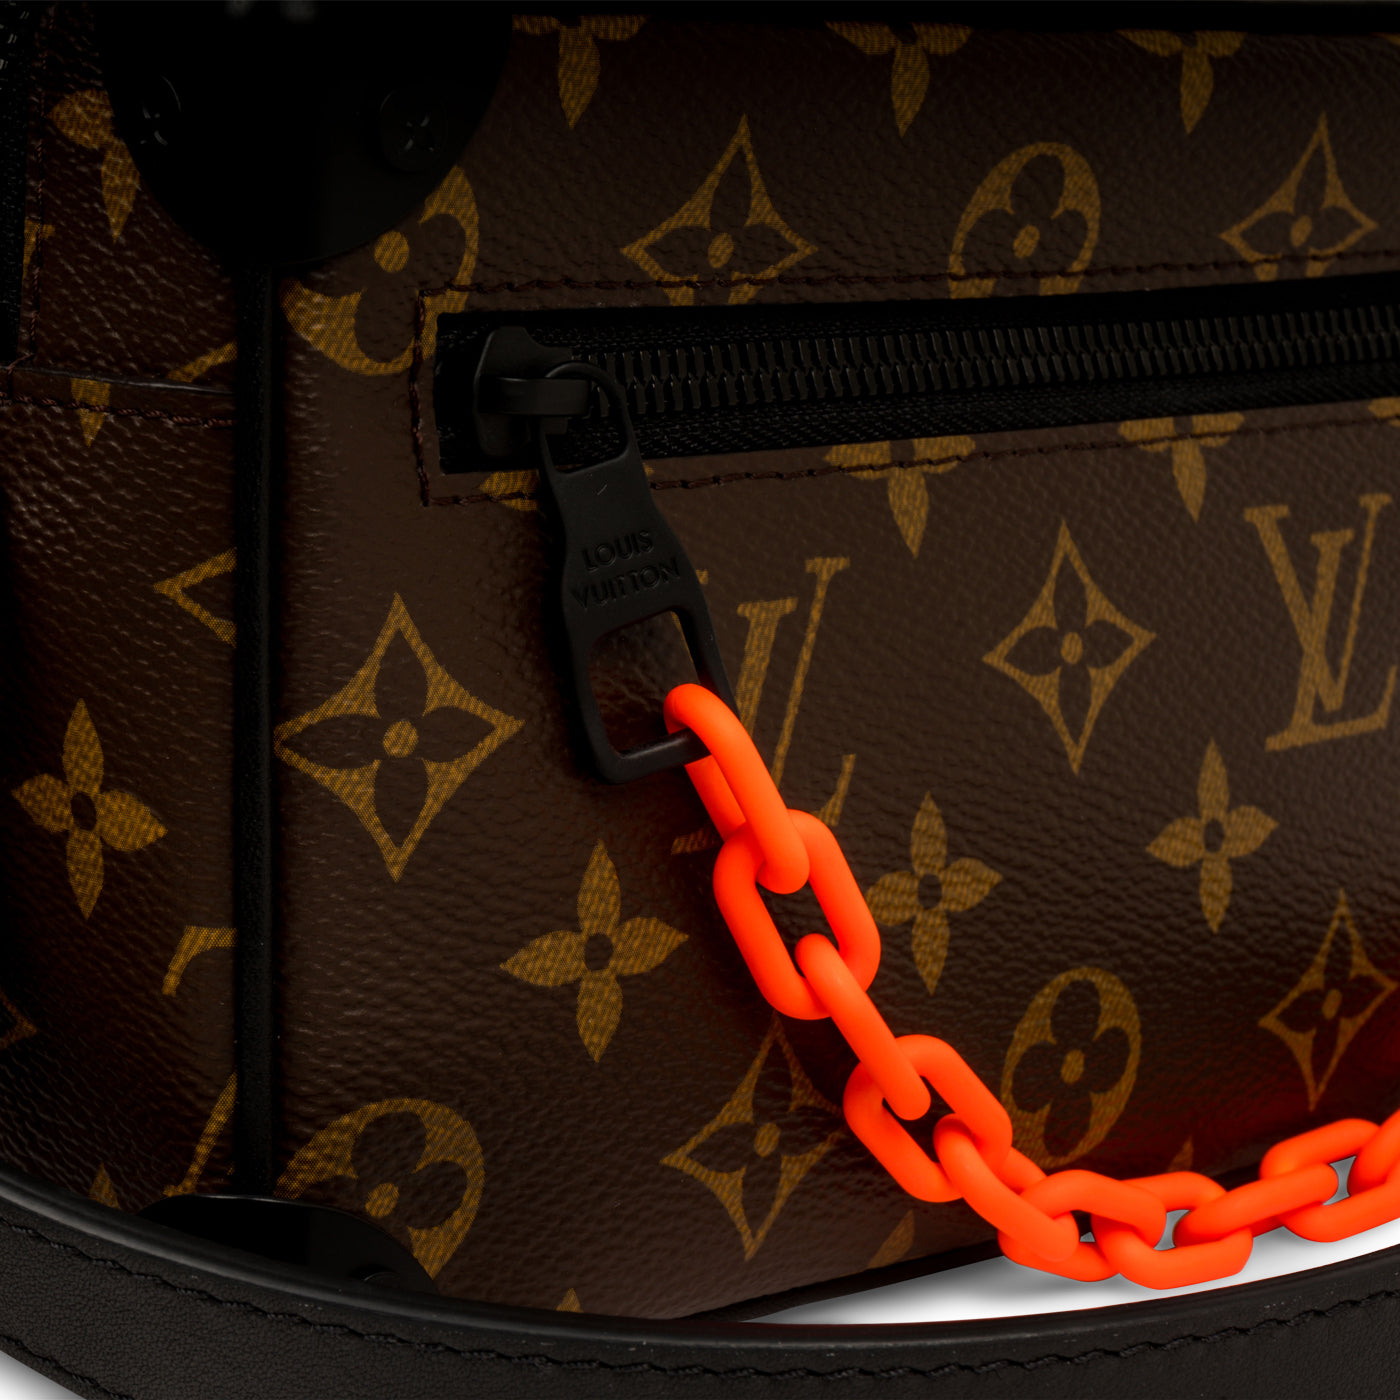 Louis Vuitton - SS19 Soft Trunk - Virgil Abloh - Sold out - Brand New ...